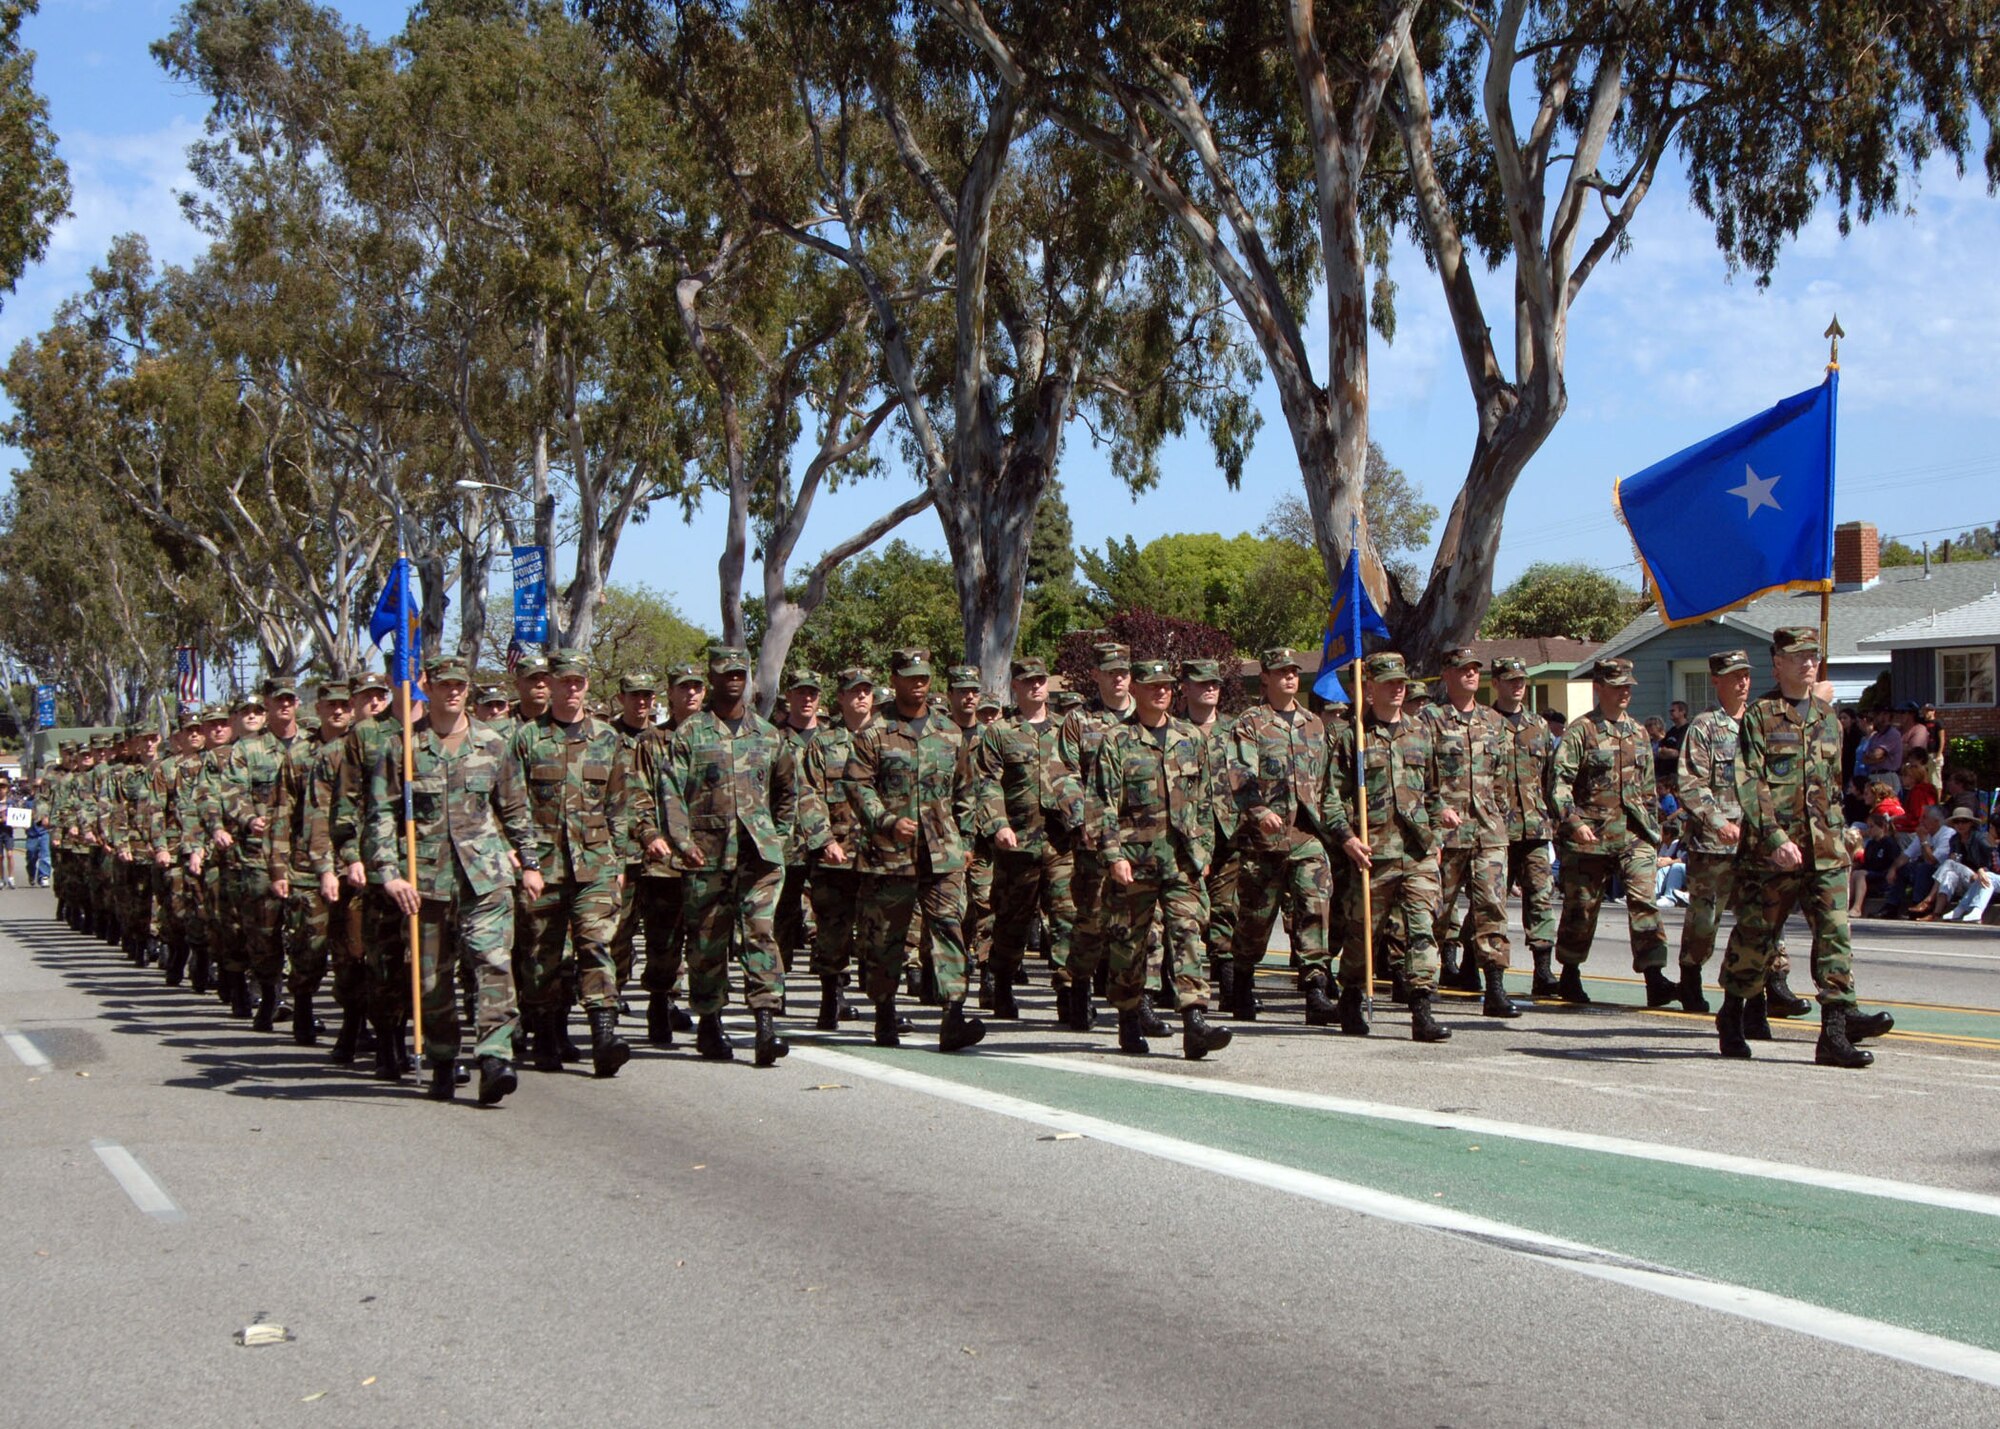 Brig. Gen. William McCasland leads the Los Angeles Air Force Base Marching Unit during the Torrance Armed Forces Day Parade. The DoD selected the City of Torrance, Calif. as one of the nationally-recognized regional sites to celebrate Armed Forces Day May 20, with dedicated military support. All five services were represented. (U.S. Air Force photo by Teri Mathis)